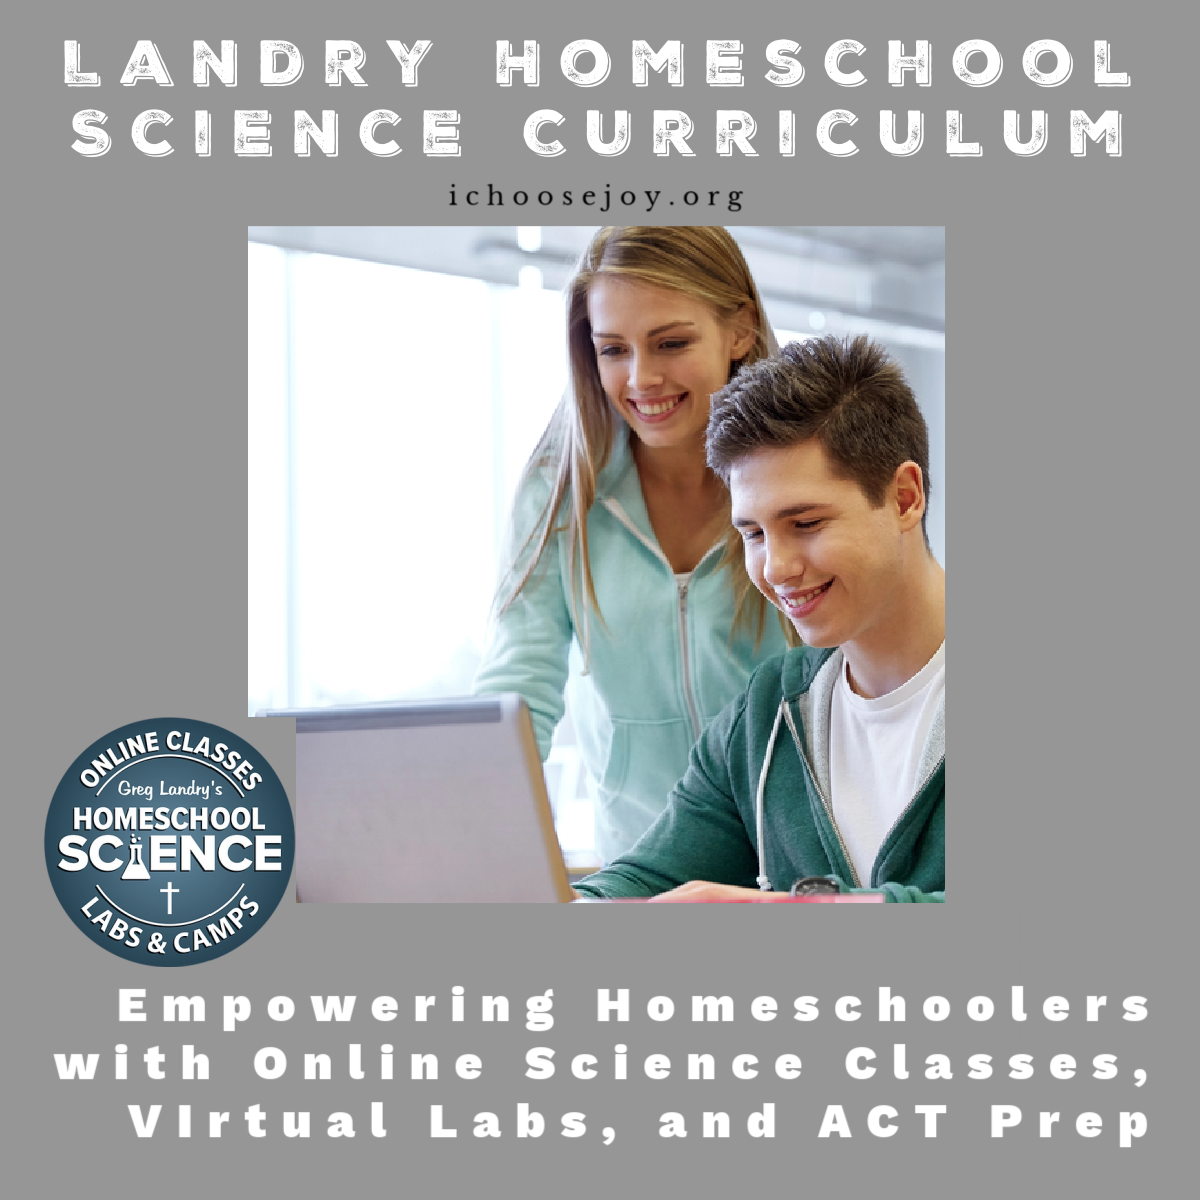 Landry Homeschool Science Curriculum: Empowering Homeschoolers with Online Science Classes, Labs, and ACT Prep